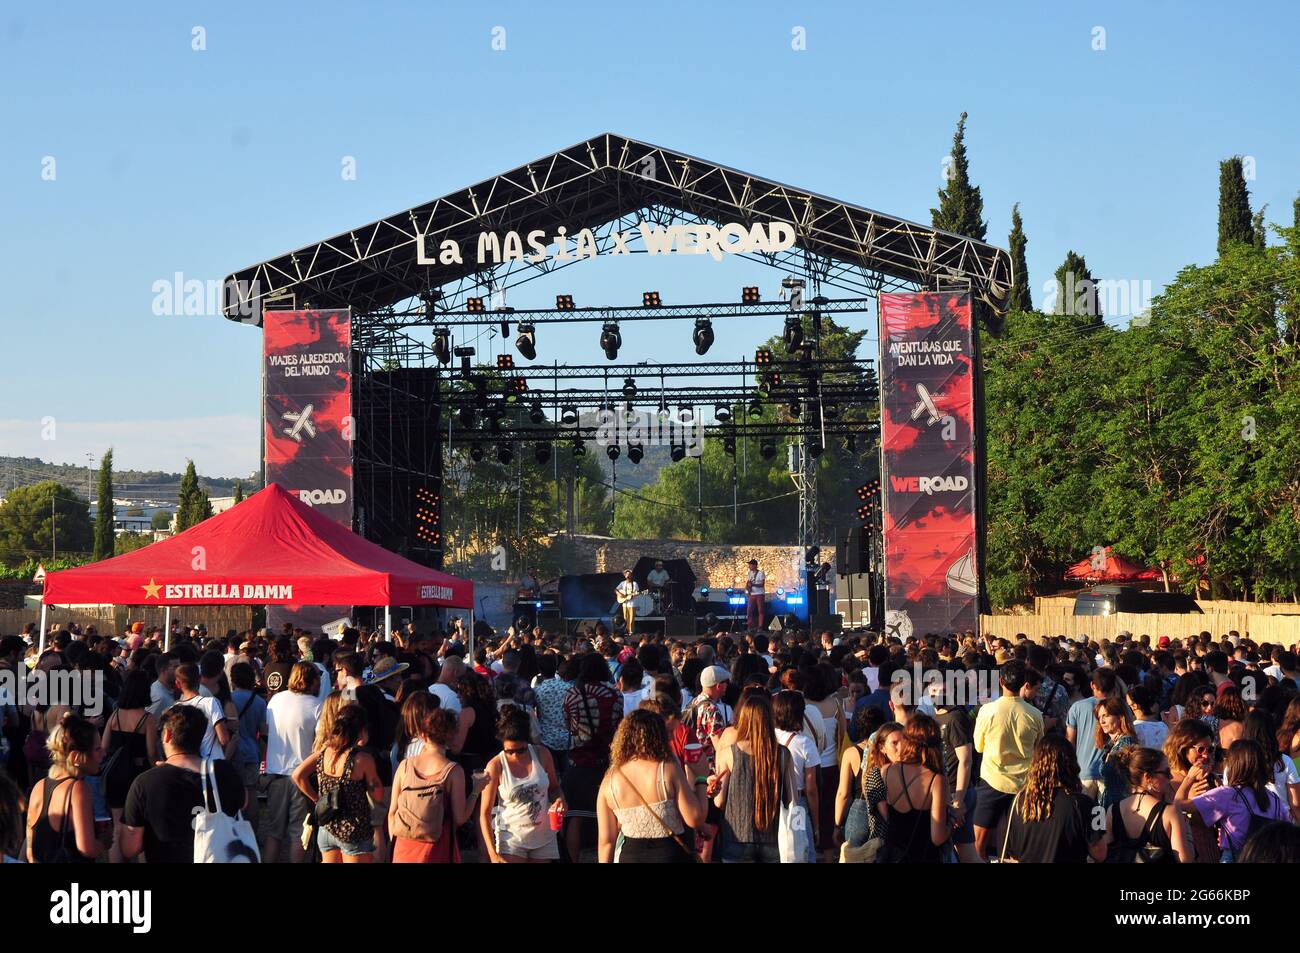 General view of the main stage of the Vida 2021 Festival.Vida 2021, an international festival that is held in the city of Vilanova i la Geltru (Barcelona) for three days and that with more than 50 live performances brings together author music, pop, rock, electronic music and indie music. Festival Vida 2021 tries to offer an experience of music, nature, sea, art and gastronomy in a bucolic setting in several stages in the same place. (Photo by Ramon Costa / SOPA Images/Sipa USA) Stock Photo